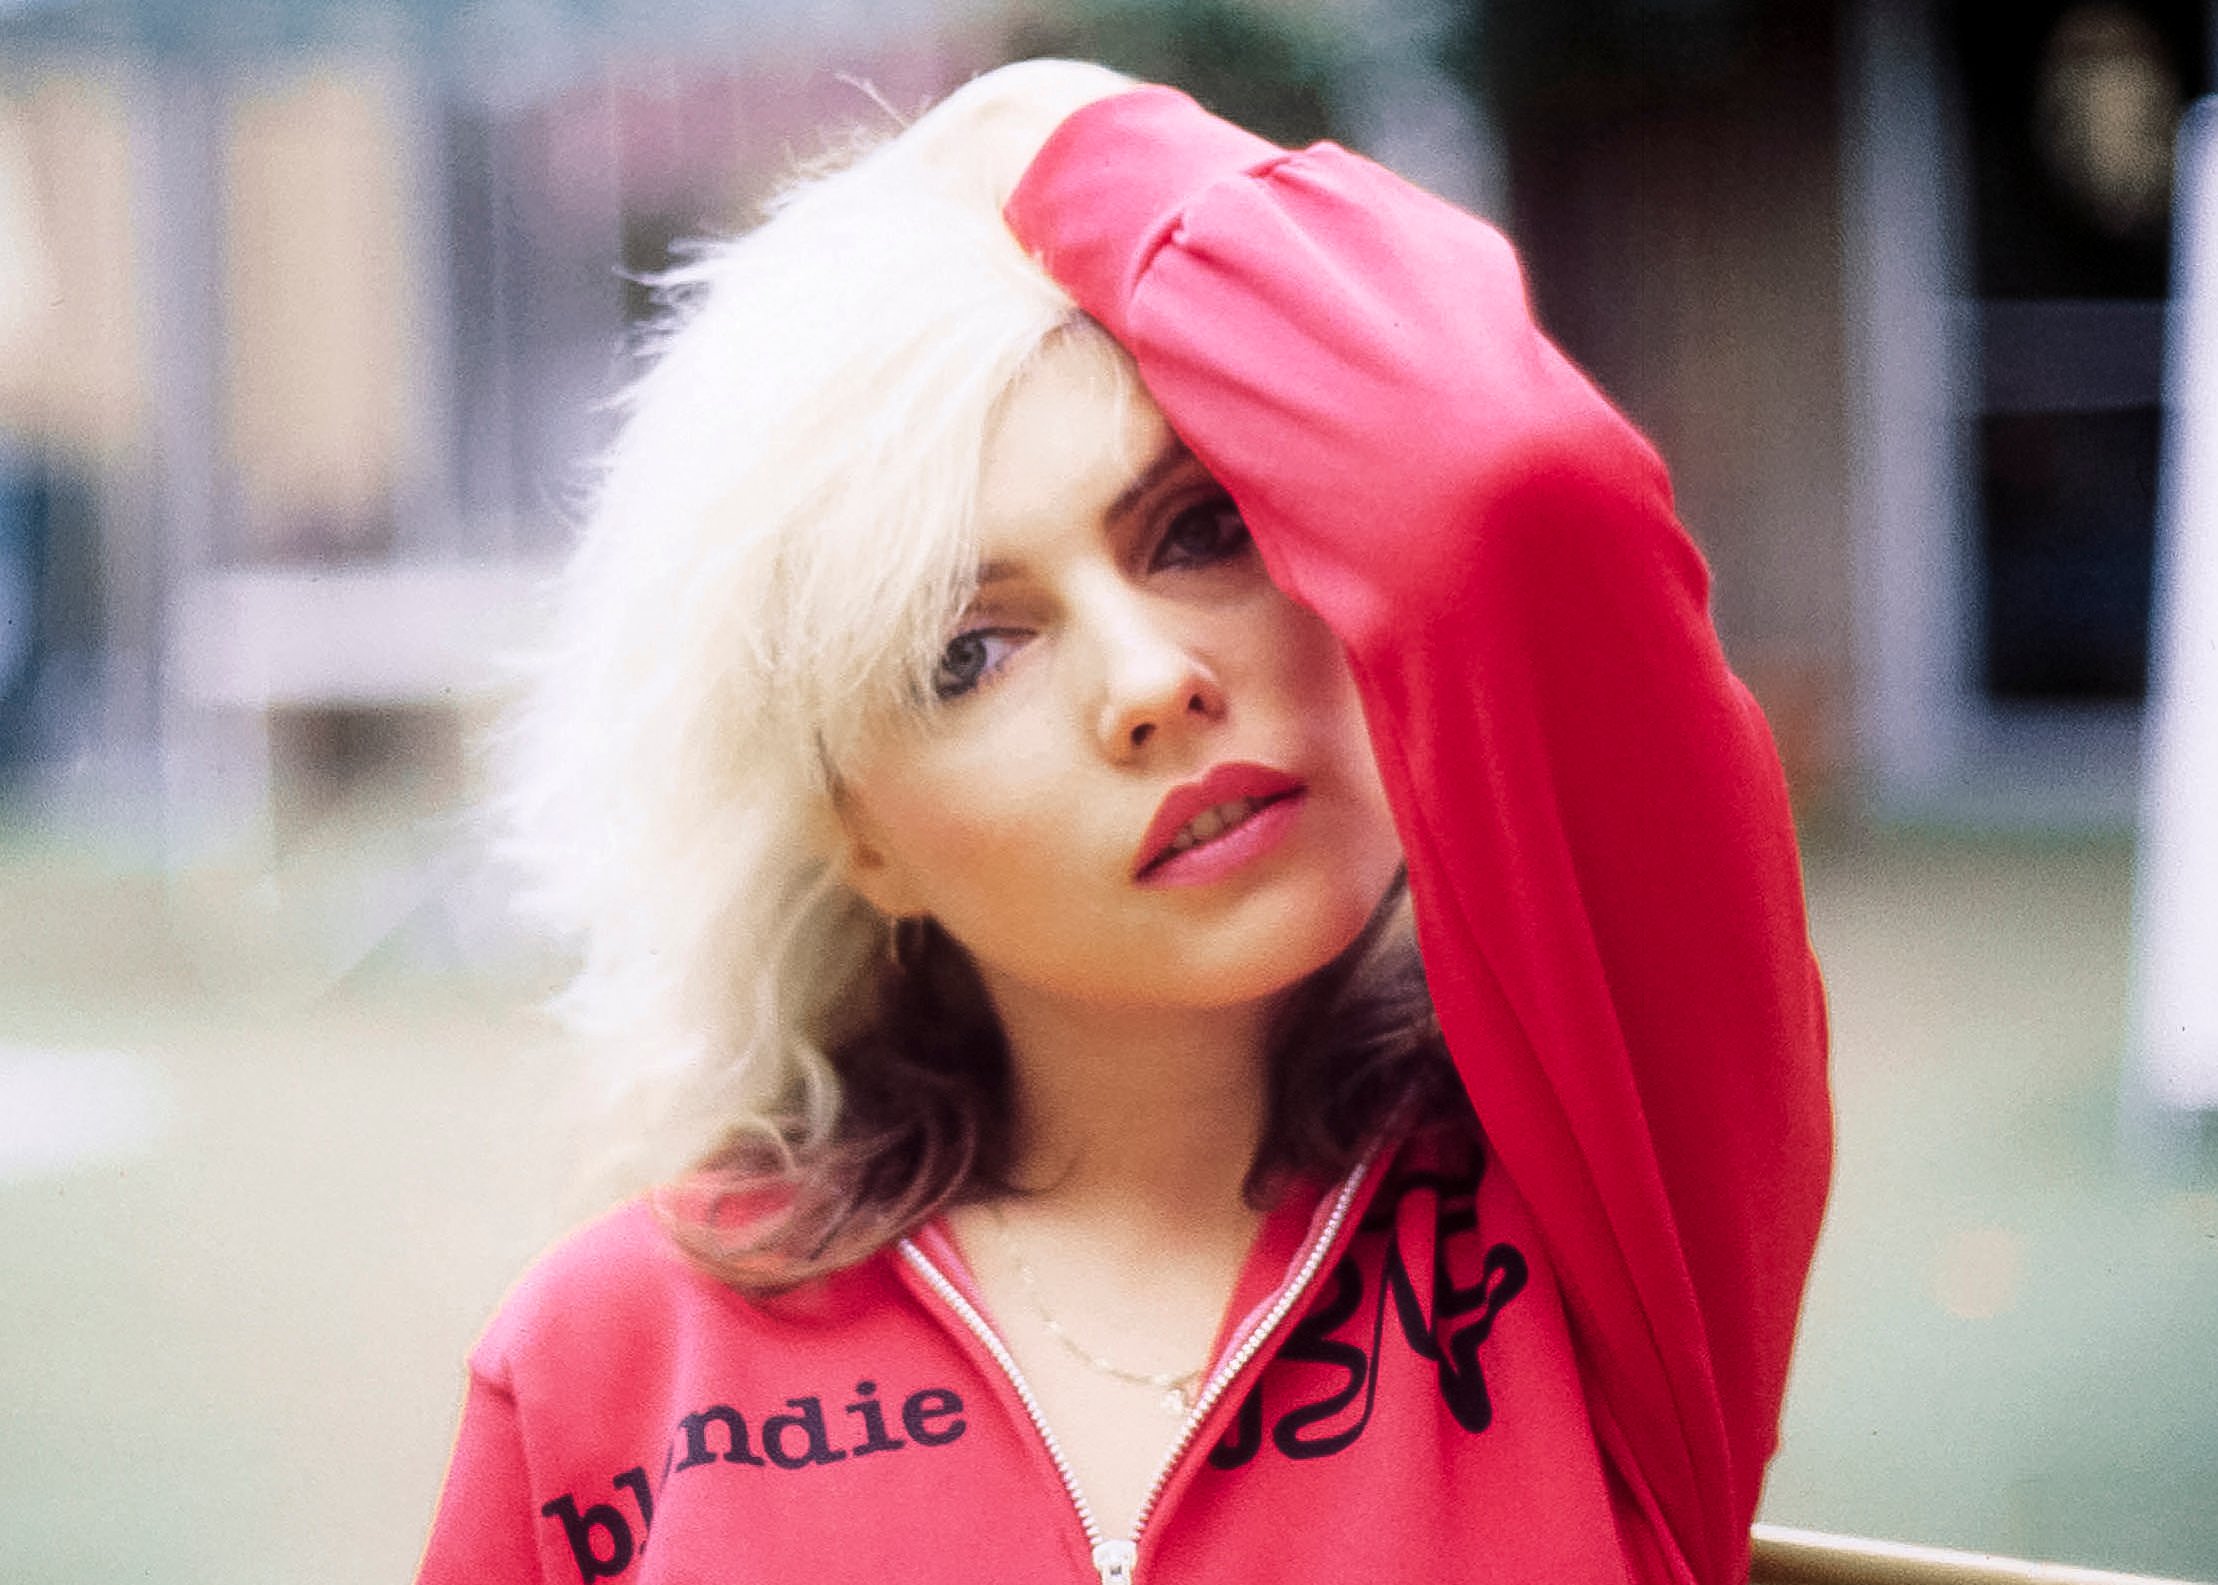 Debbie Harry of Blondie wearing pink and putting her fingers through her hair